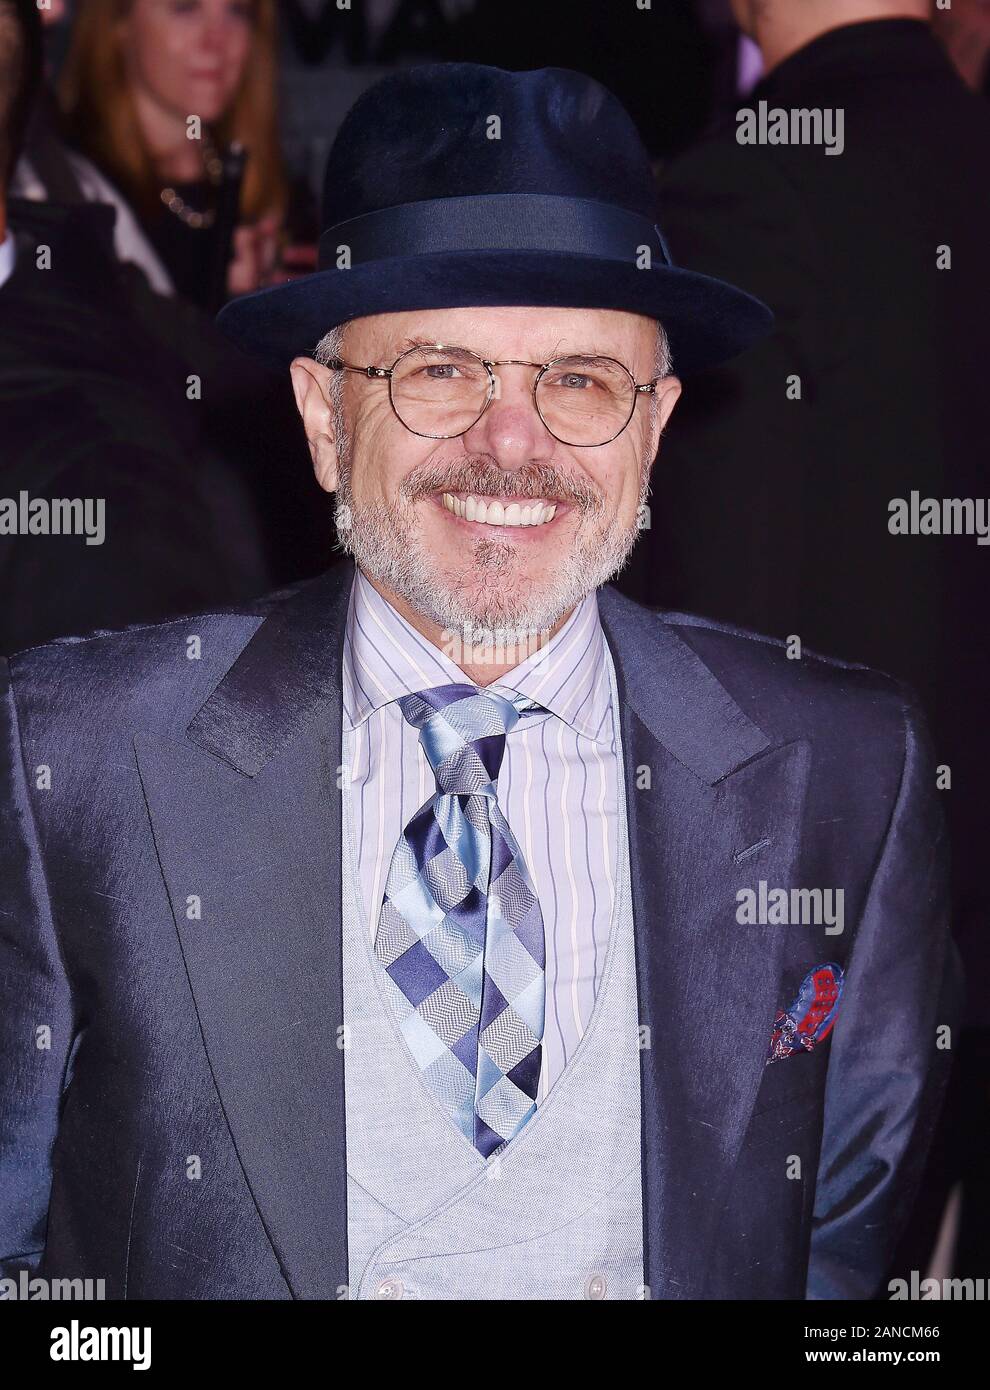 HOLLYWOOD, CA - JANUARY 14: Joe Pantoliano attends the premiere of Columbia Pictures' "Bad Boys For Life" at TCL Chinese Theatre on January 14, 2020 in Hollywood, California. Stock Photo